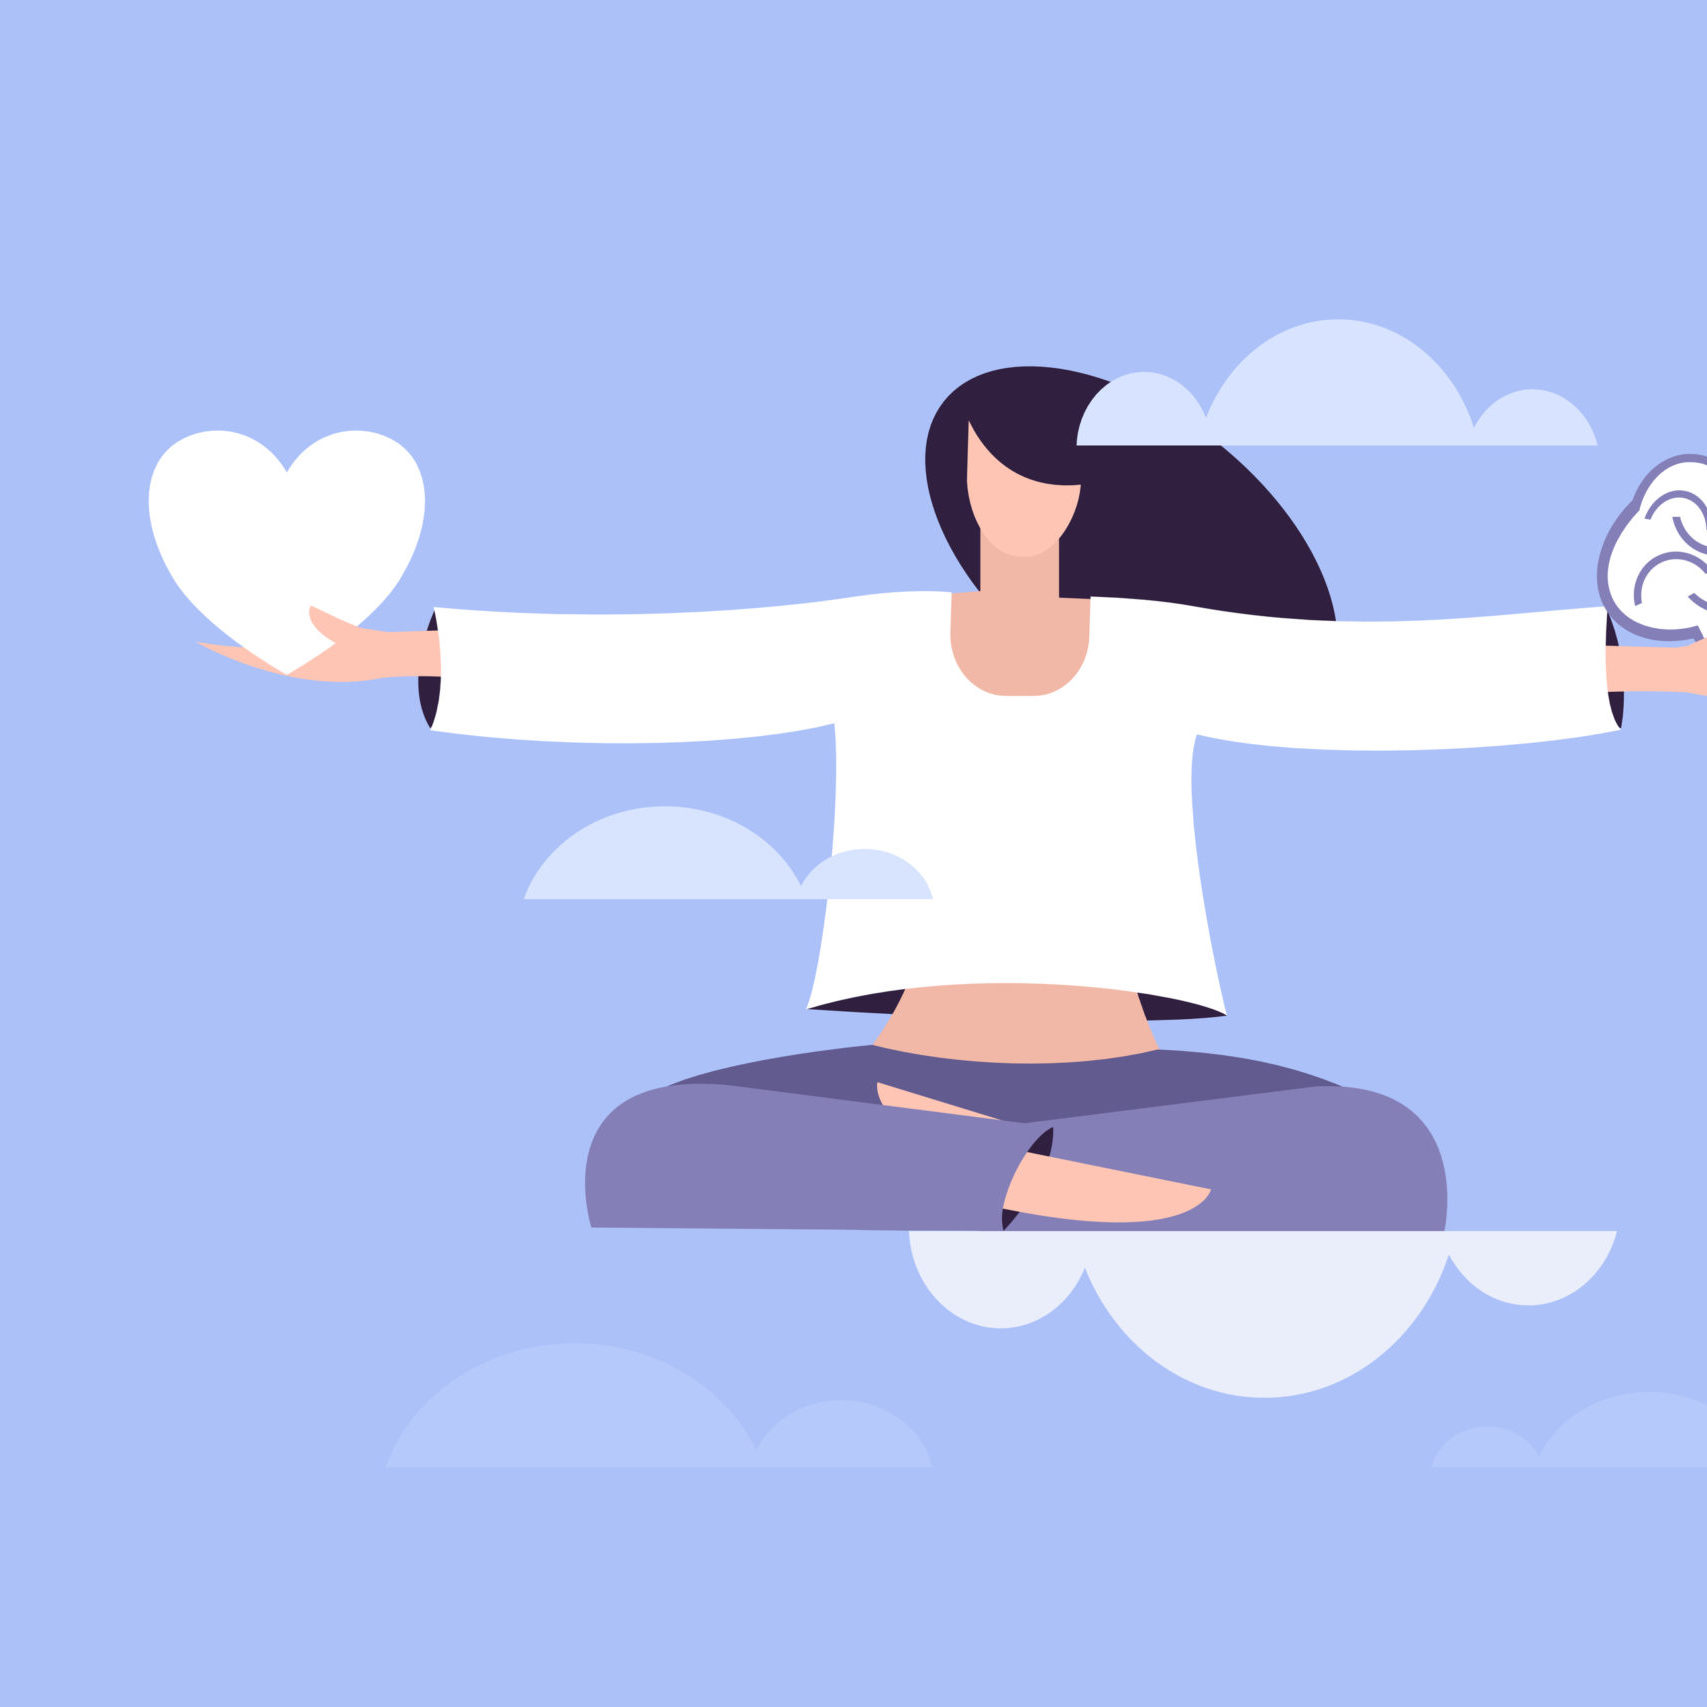 Conceptual illustration of a girl in a meditative pose floating in the clouds and balancing heart and brain in her hands